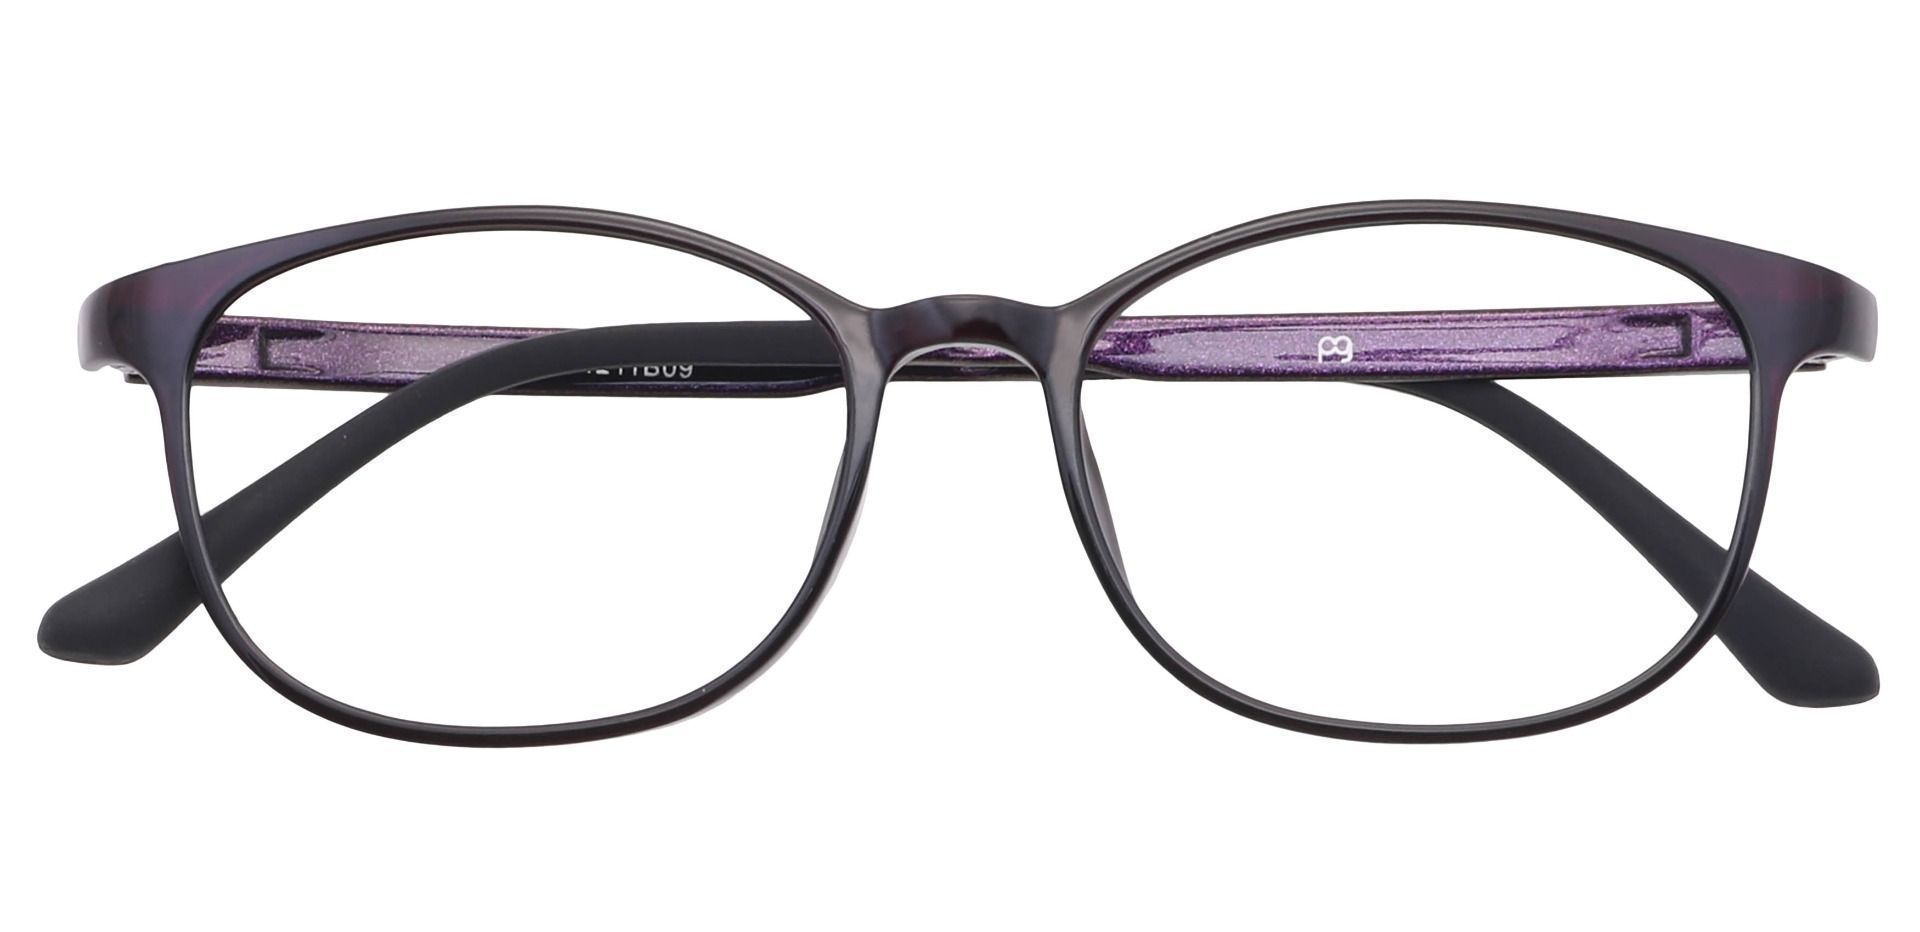 Sherry Oval Non-Rx Glasses - Plum Crystal